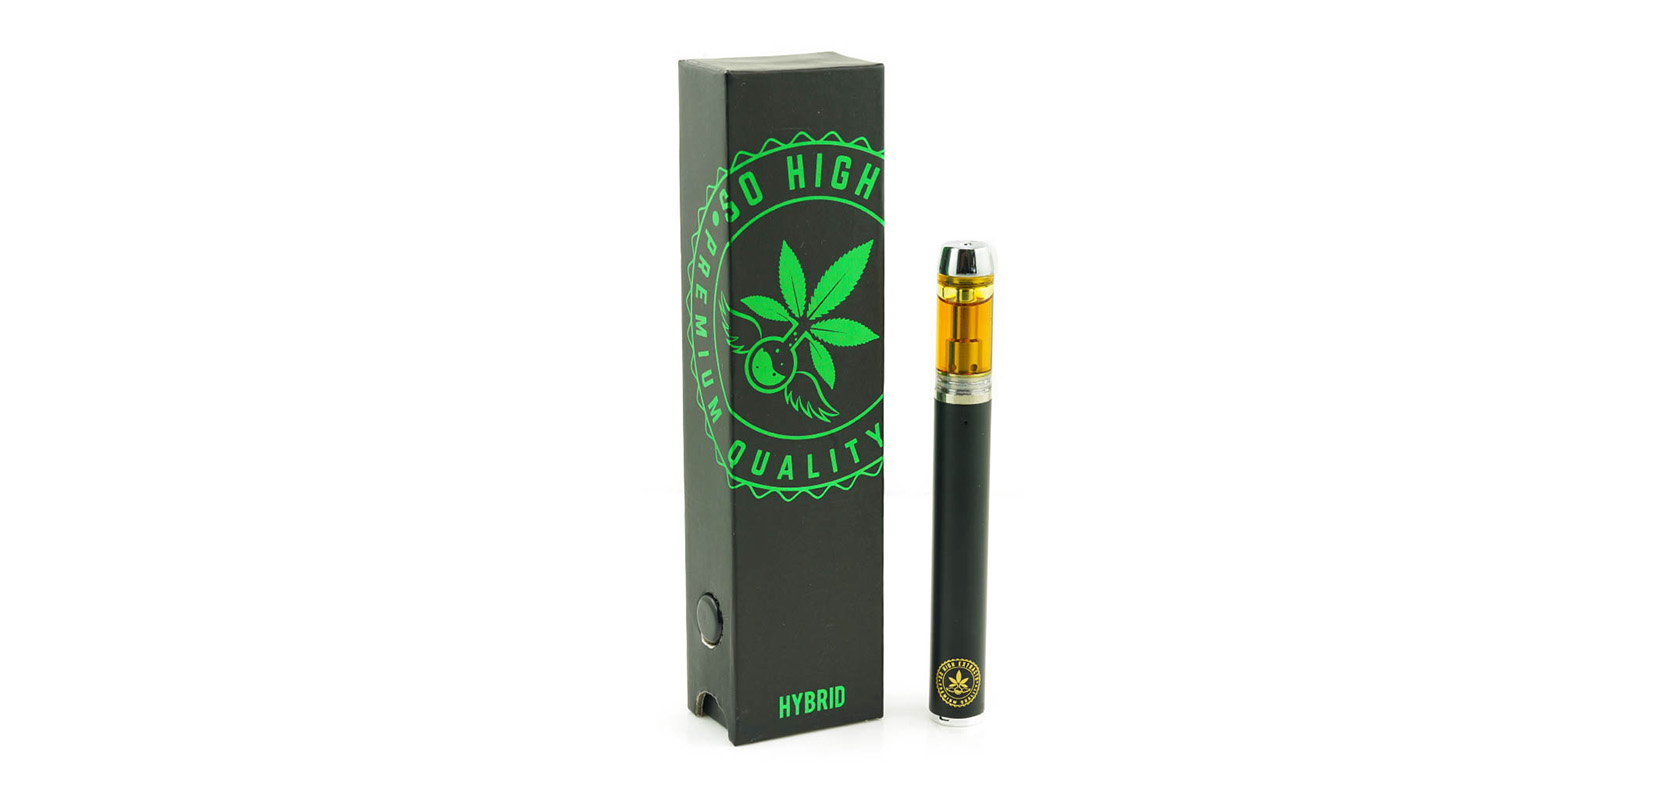 Disposable Vape Pen Sunset Sherbet weed online Canada. Online dispensary for mail order marijuana. Buy weed.